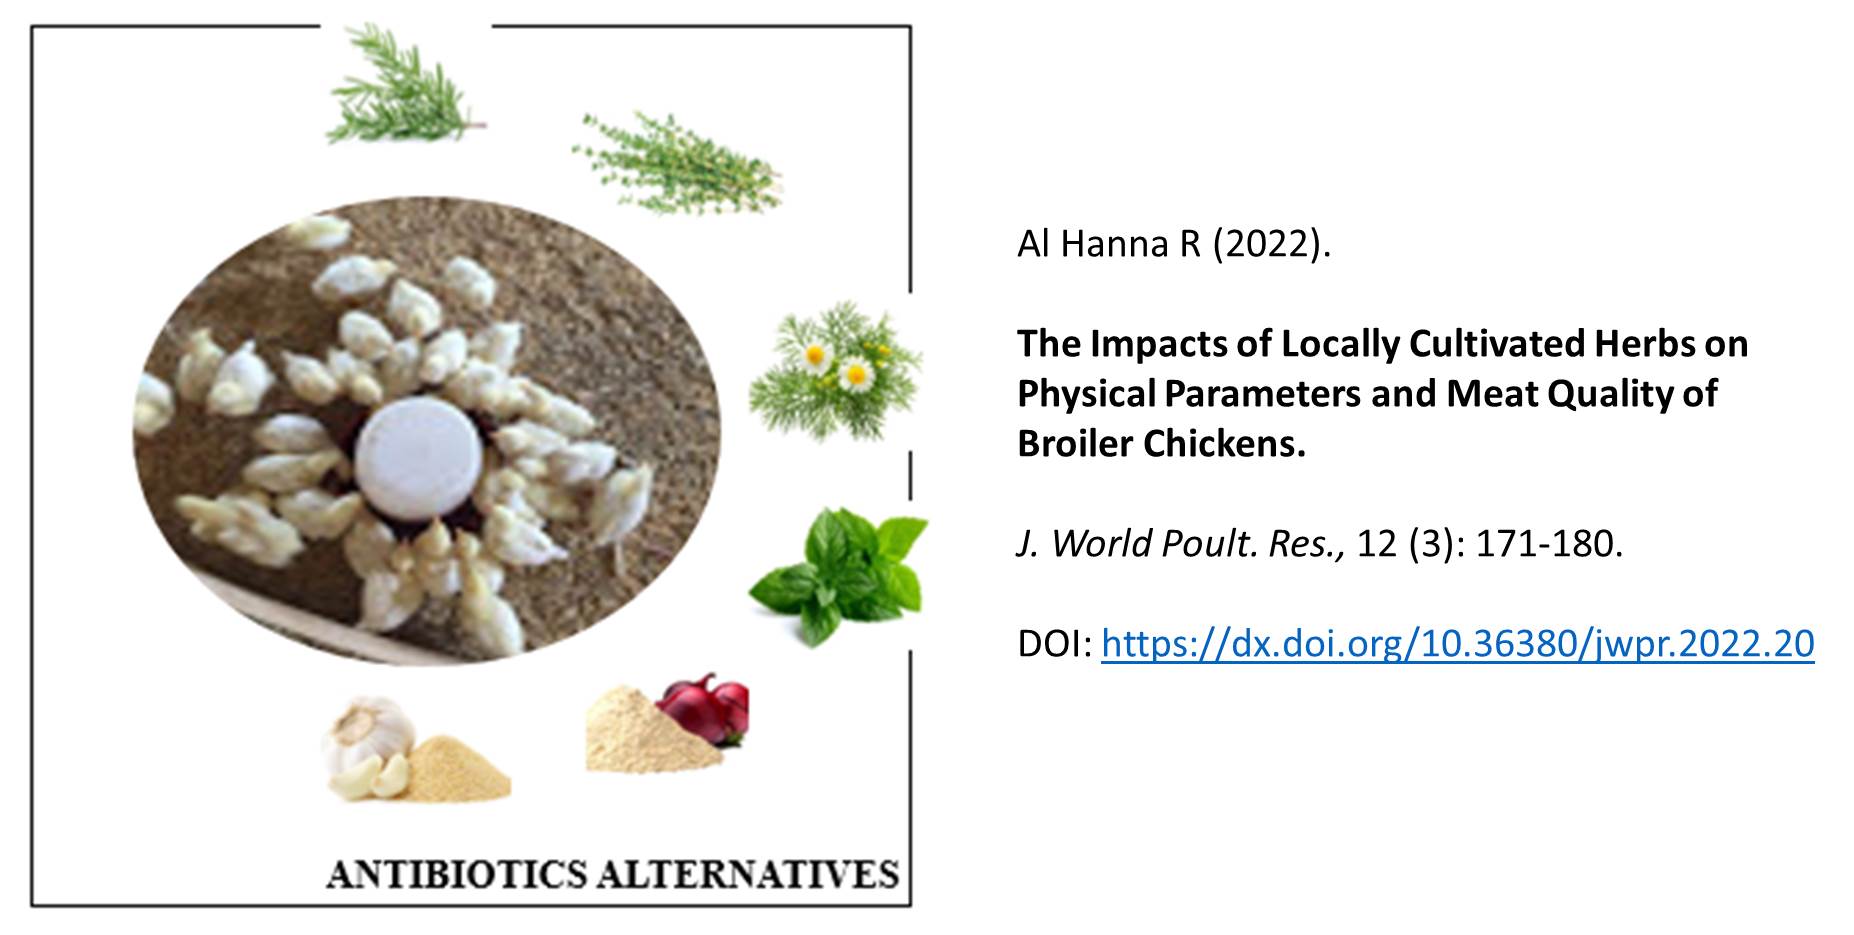 165-Impacts_of_Locally_Cultivated_Herbs_on_Meat_Quality_of_Broiler_Chickens